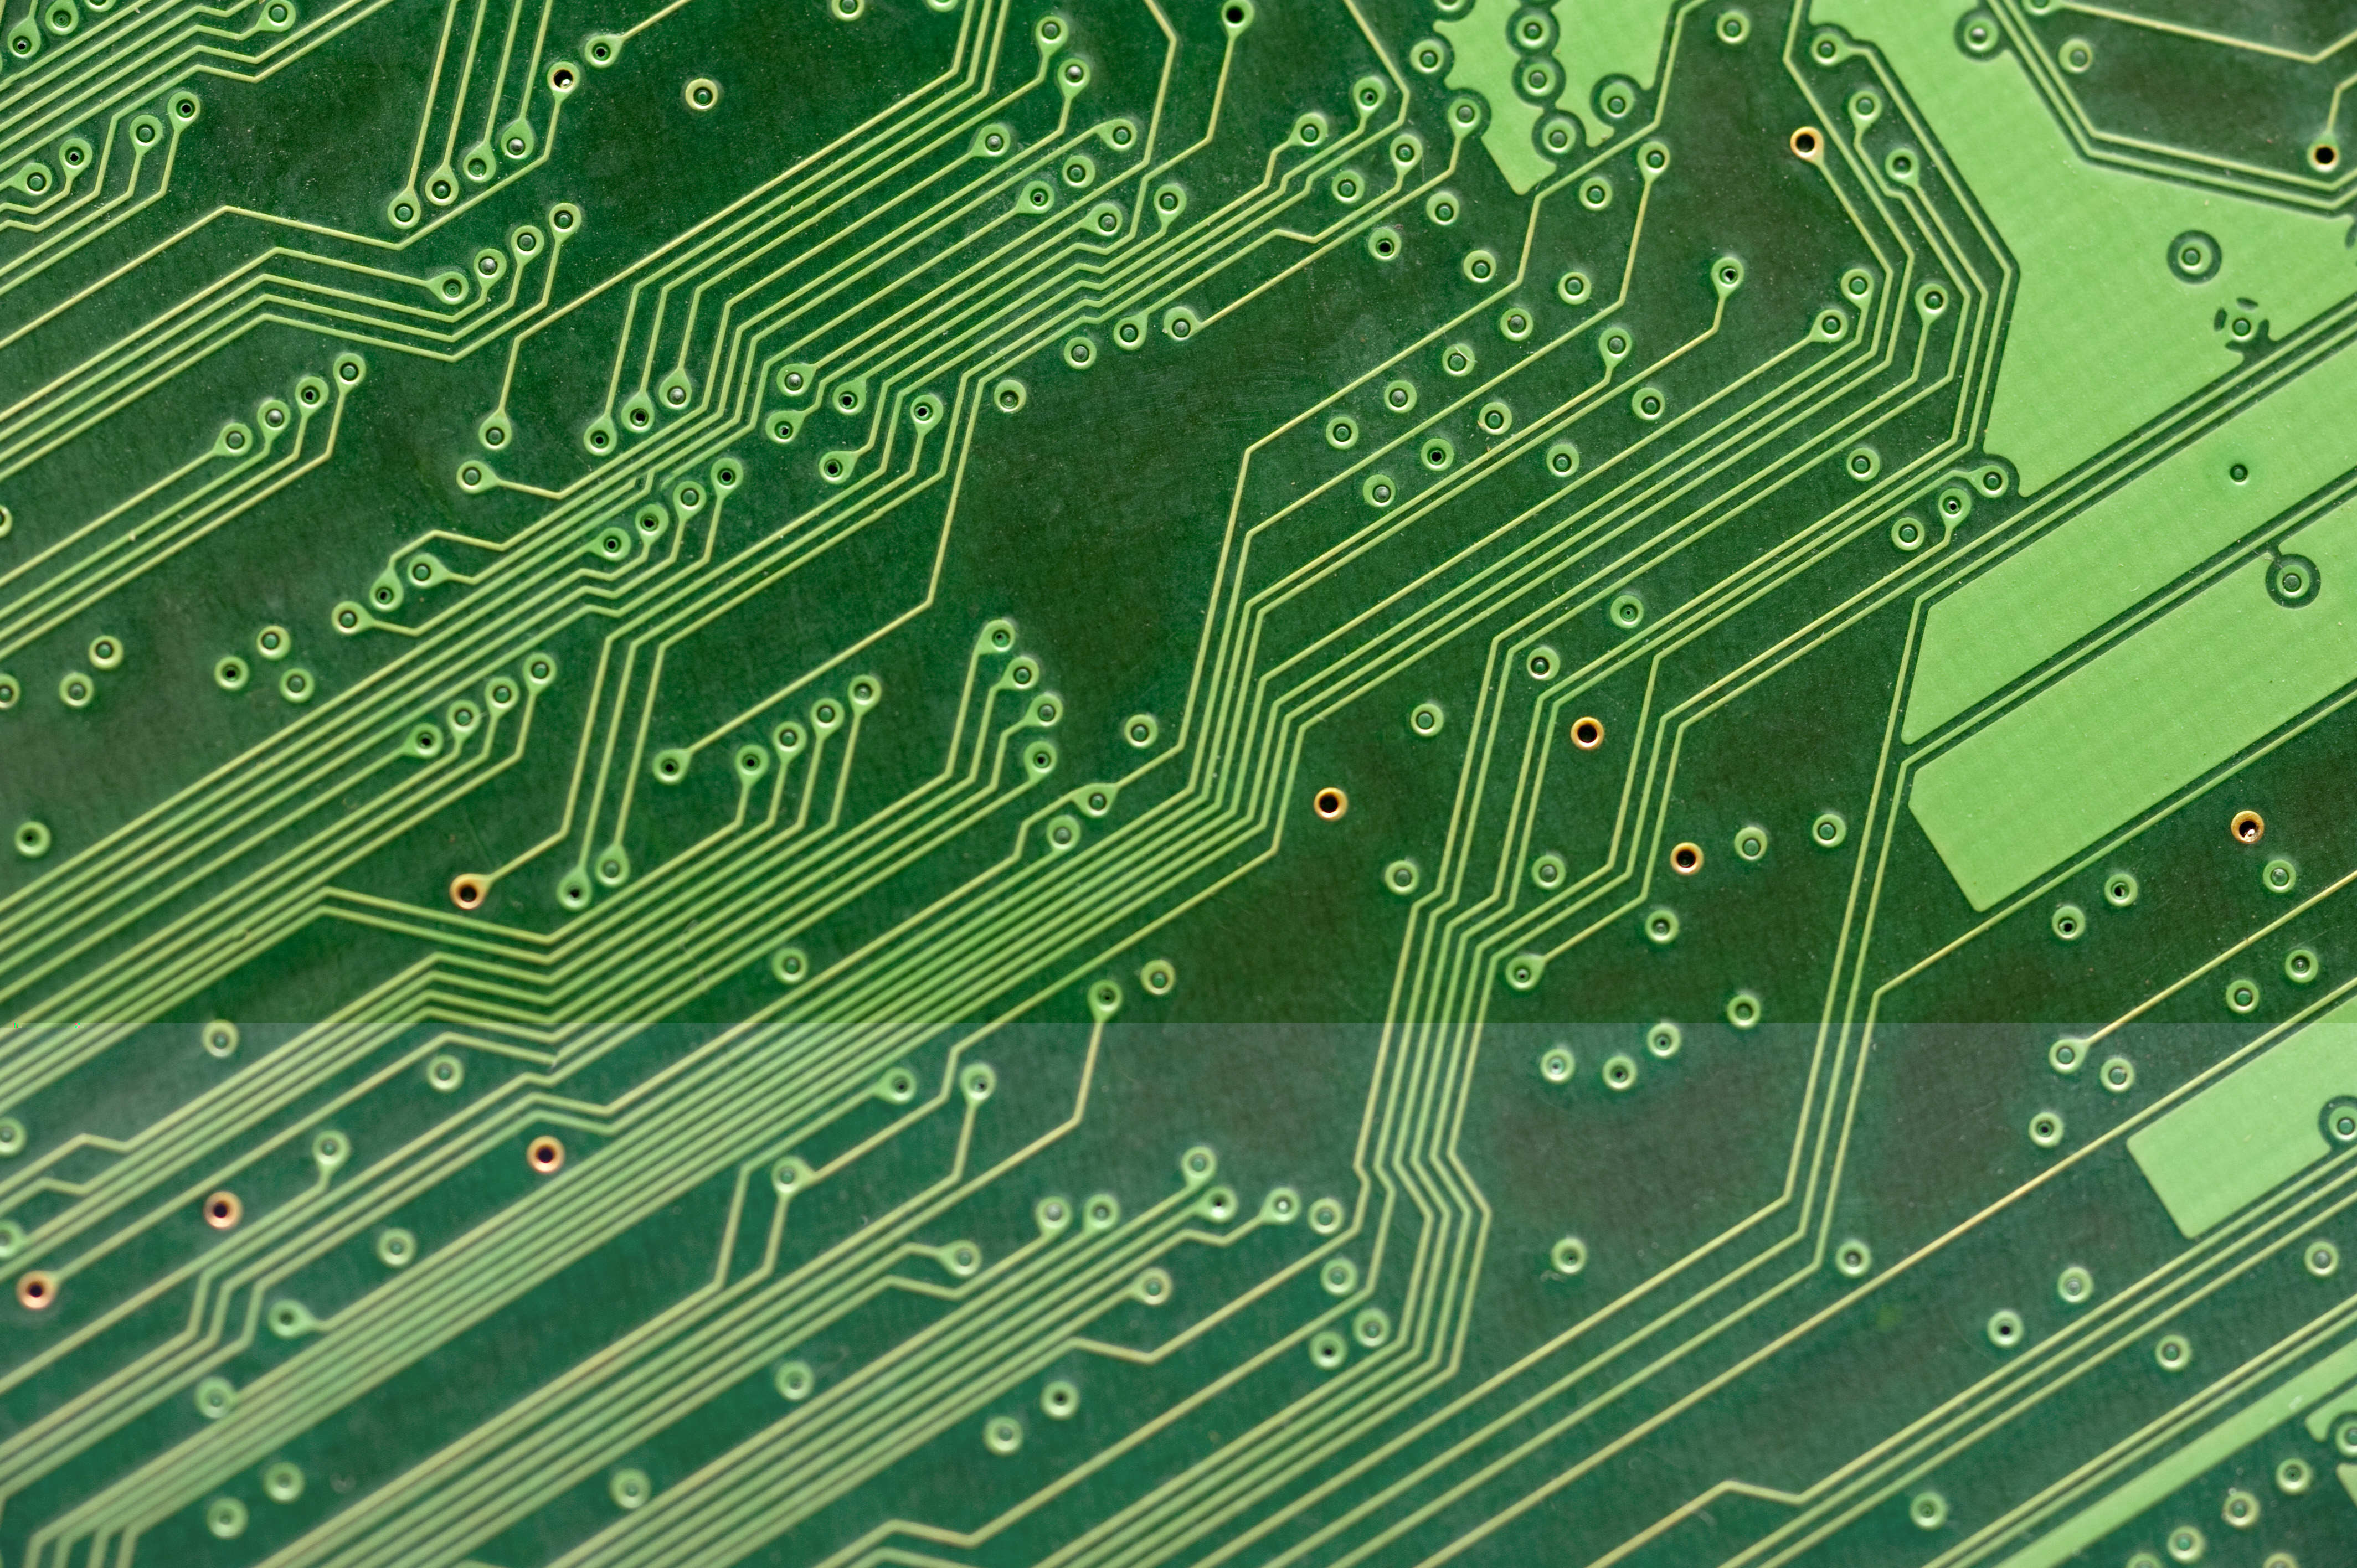 electronic circuits | Free backgrounds and textures | Cr103.com